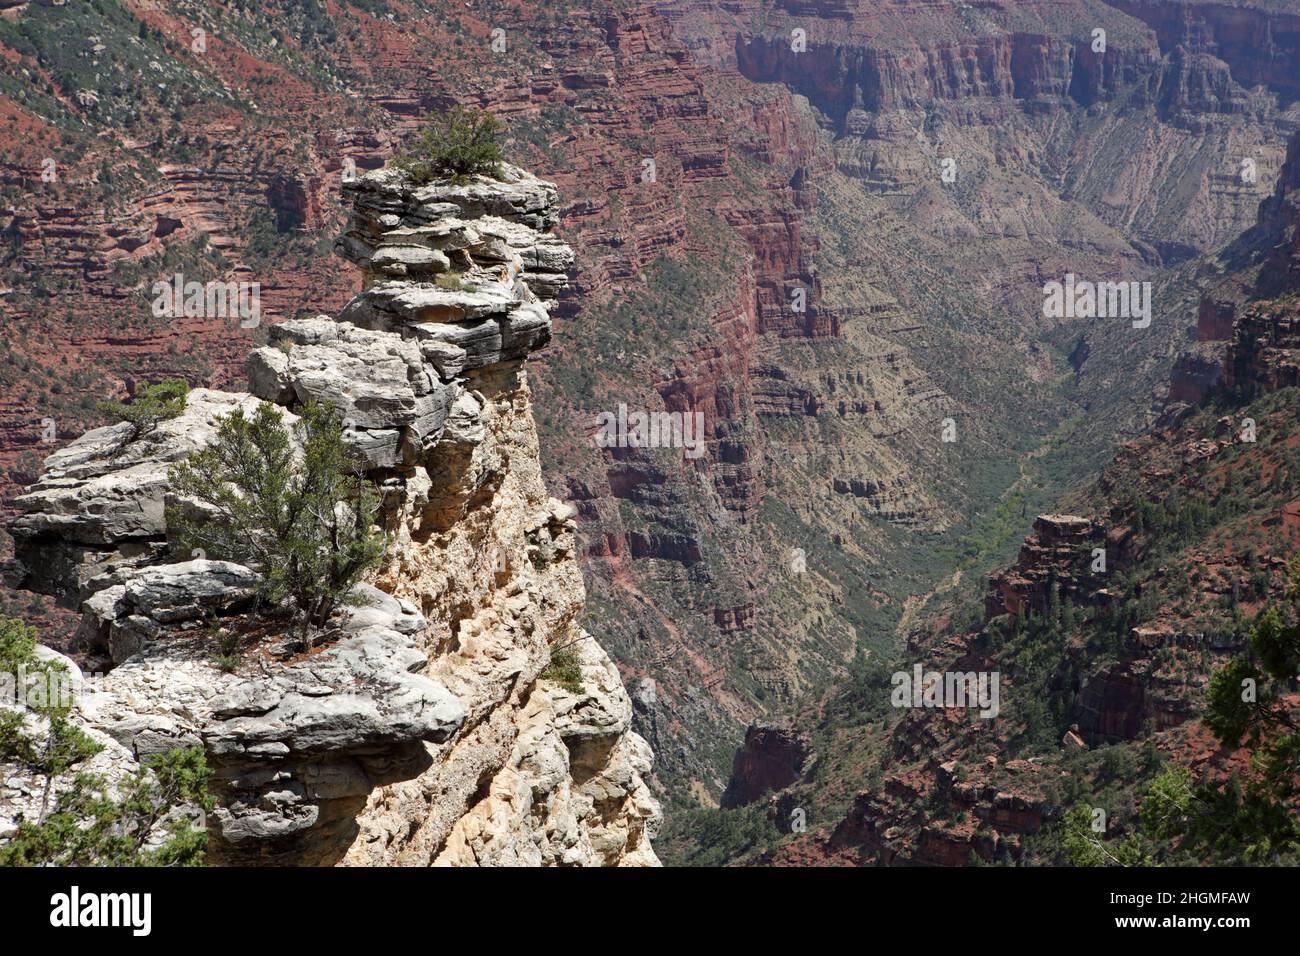 View looking down a deep side canyon eroded through red sandstone layers at an overlook point on the Widforss hiking trail, Grand Canyon North Rim Stock Photo